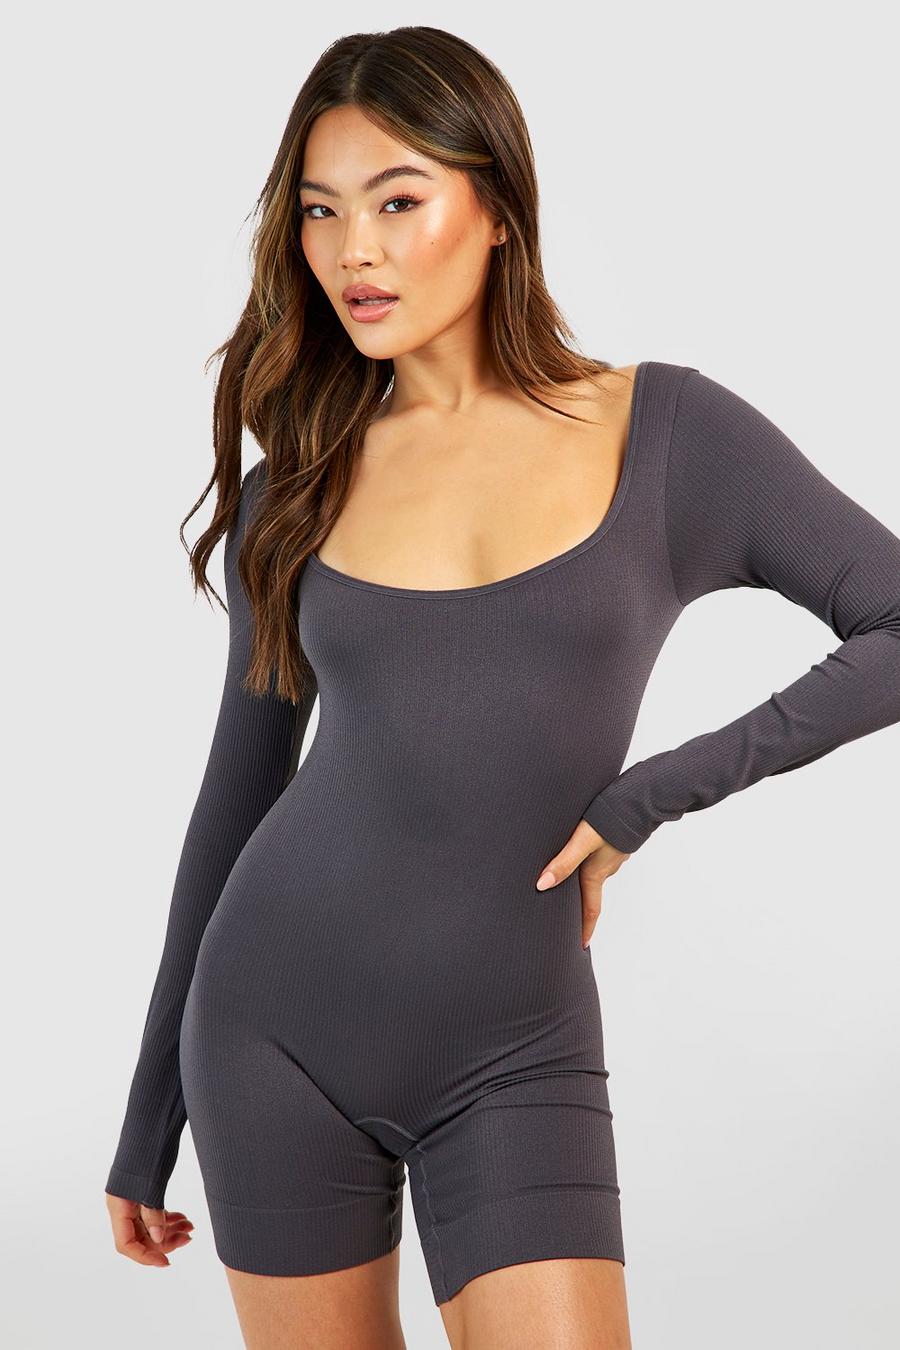 Charcoal Snatched Rib Zip Up Long Sleeve Bodysuit